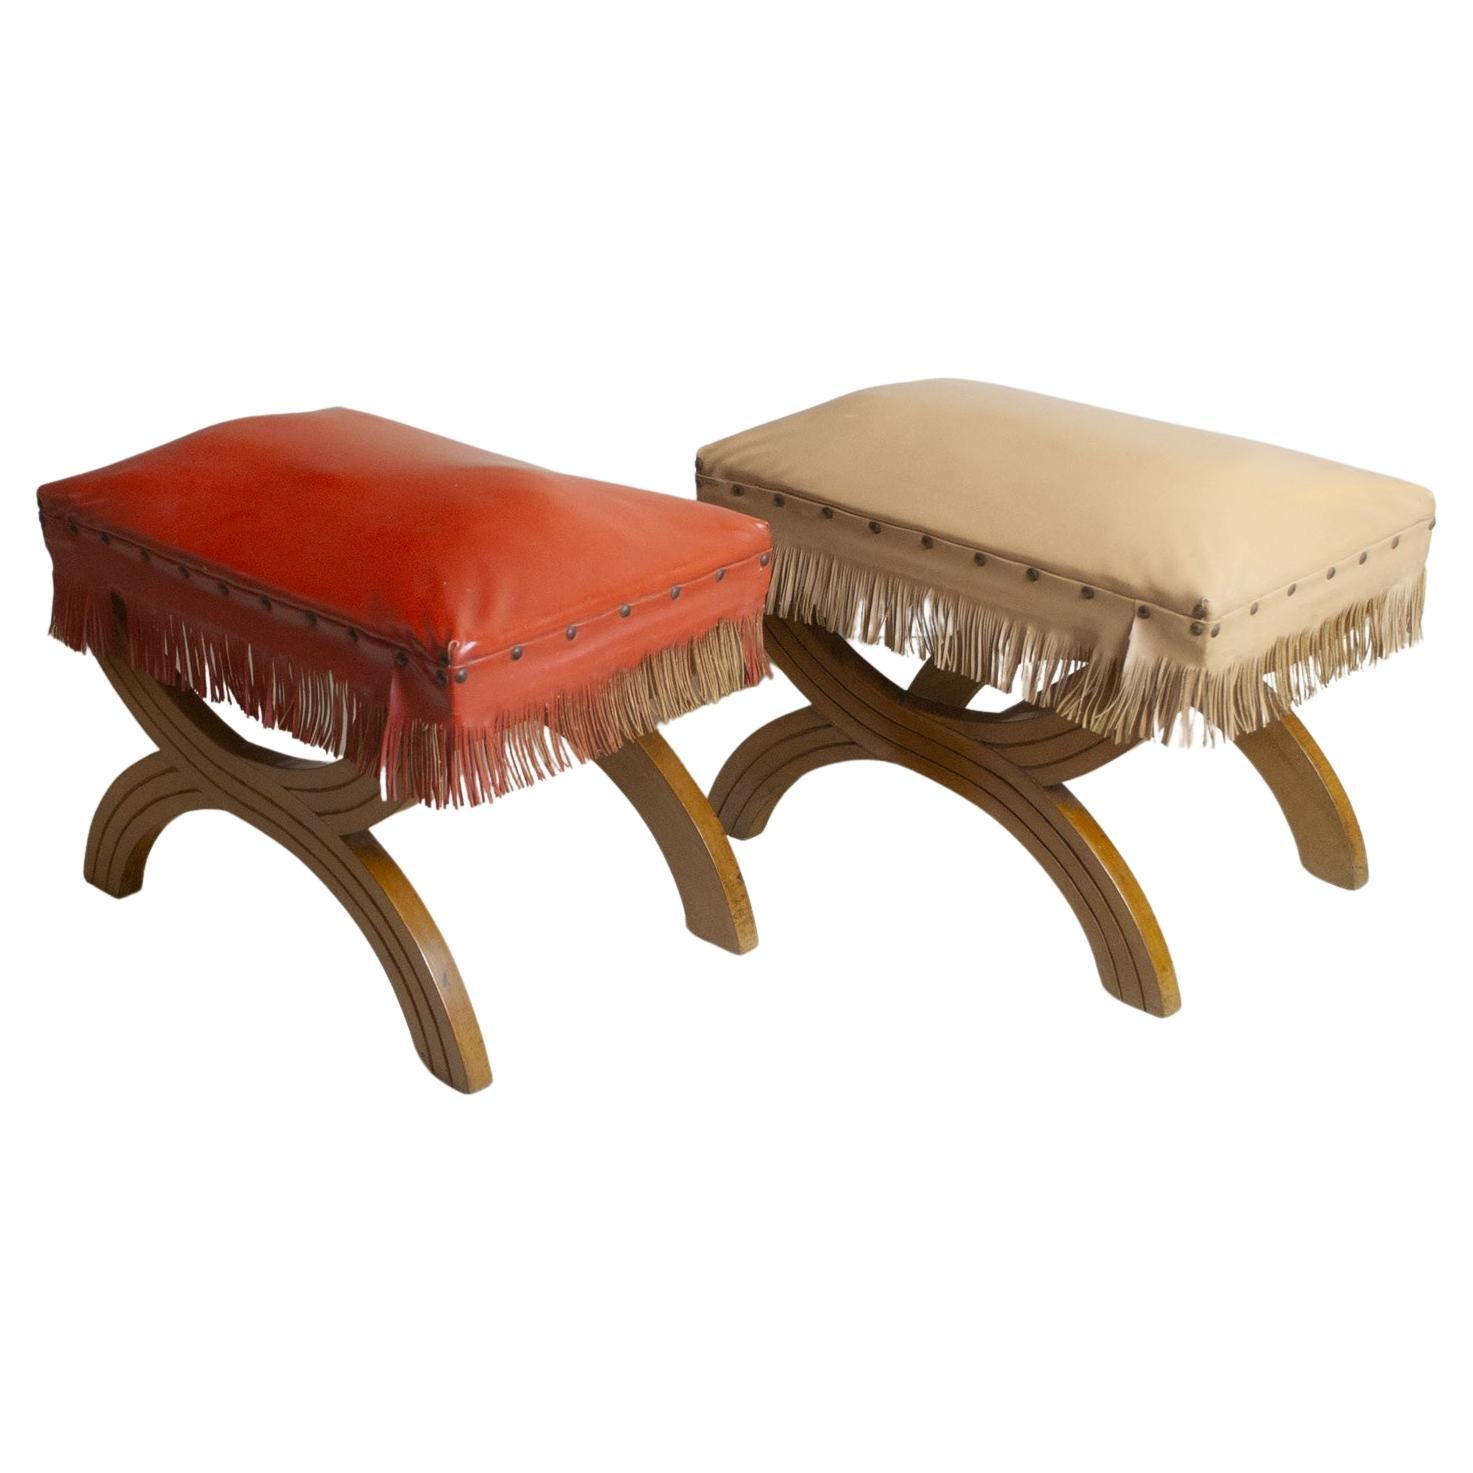 Gio Ponti in the Style Pair of Wooden Stools from the 1960s For Sale